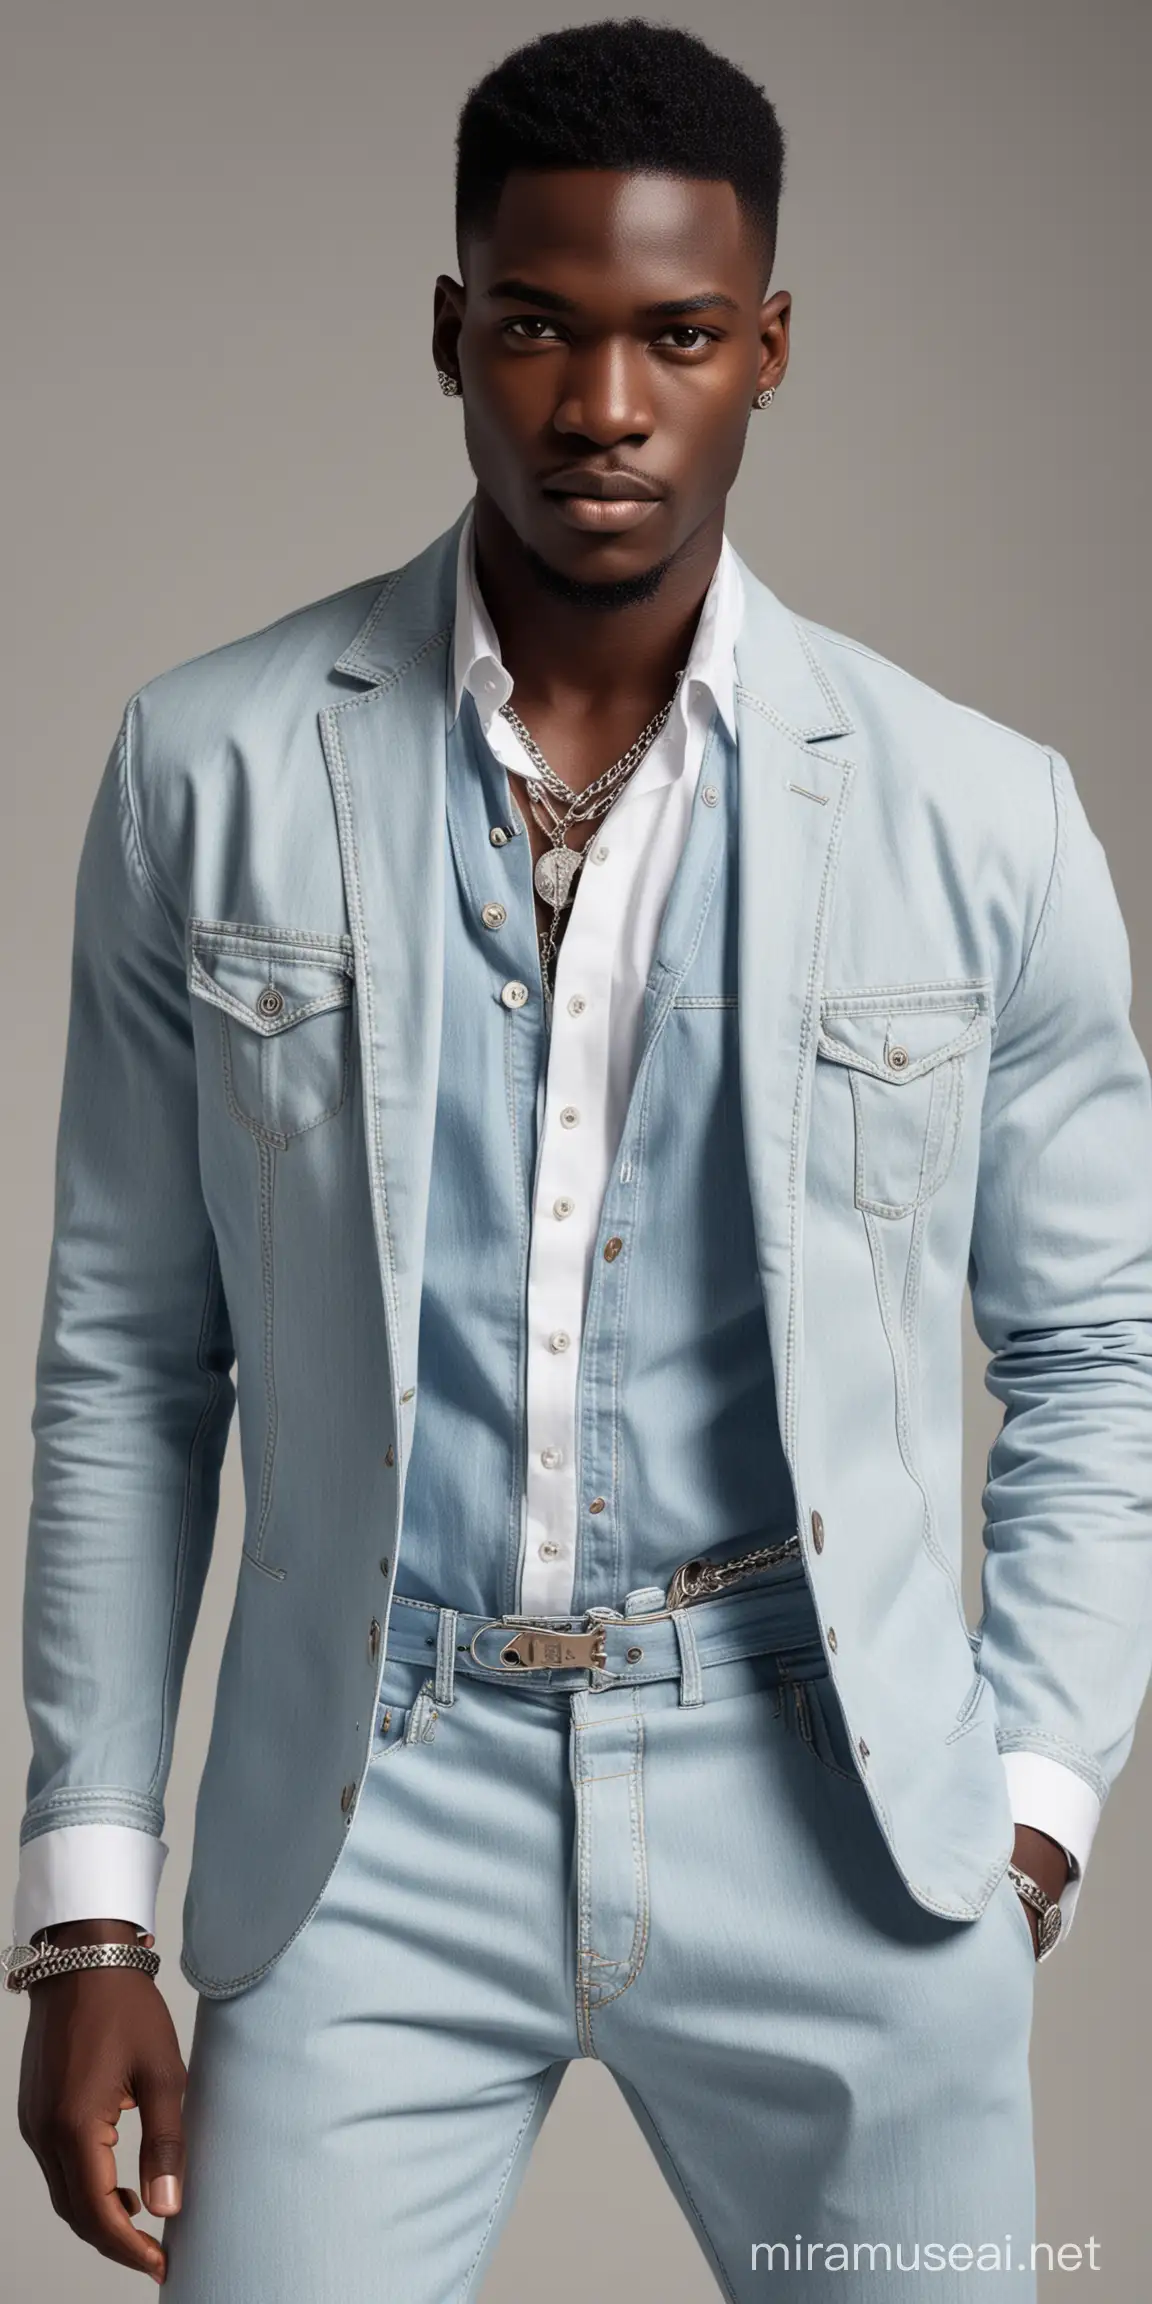 African Male Model in Stylish Jean Suit and White Shirt with Silver Chain Accents